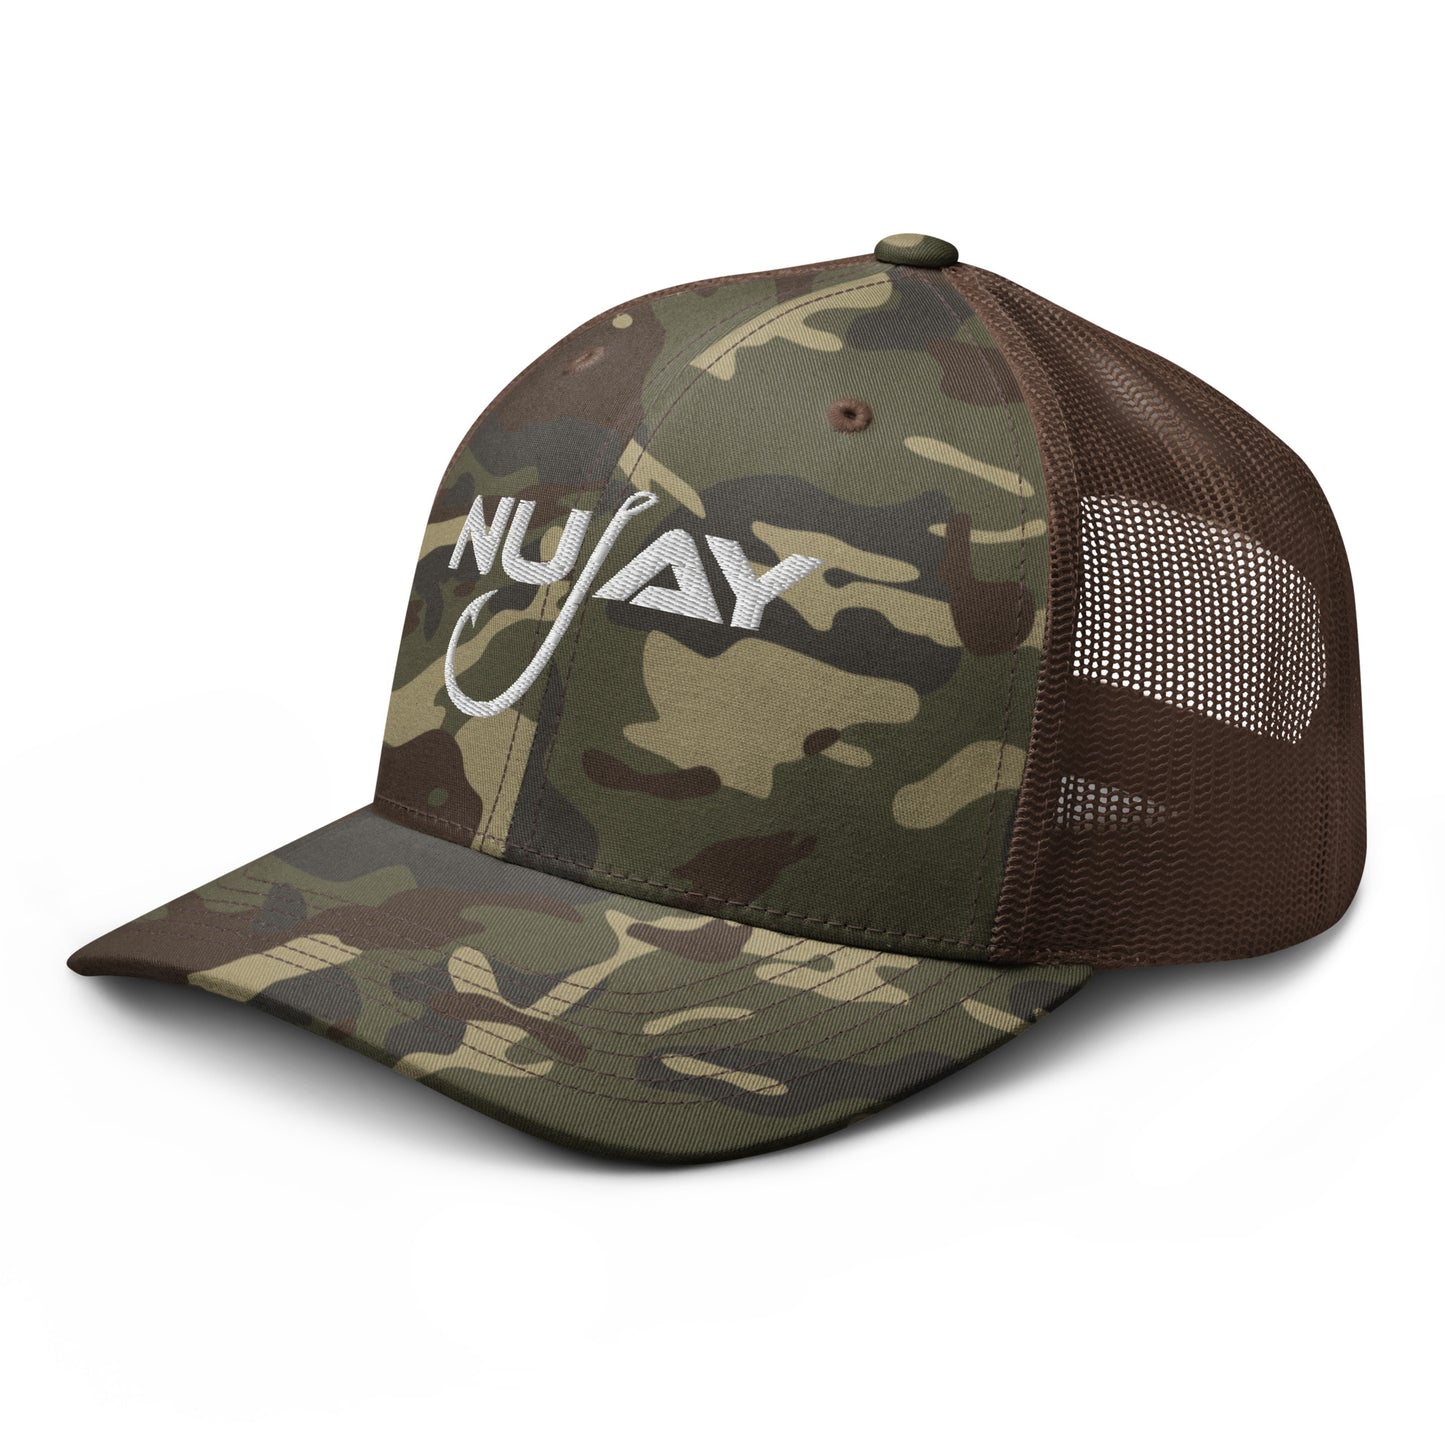 Nujay Outdoors Camouflage Trucker Hat